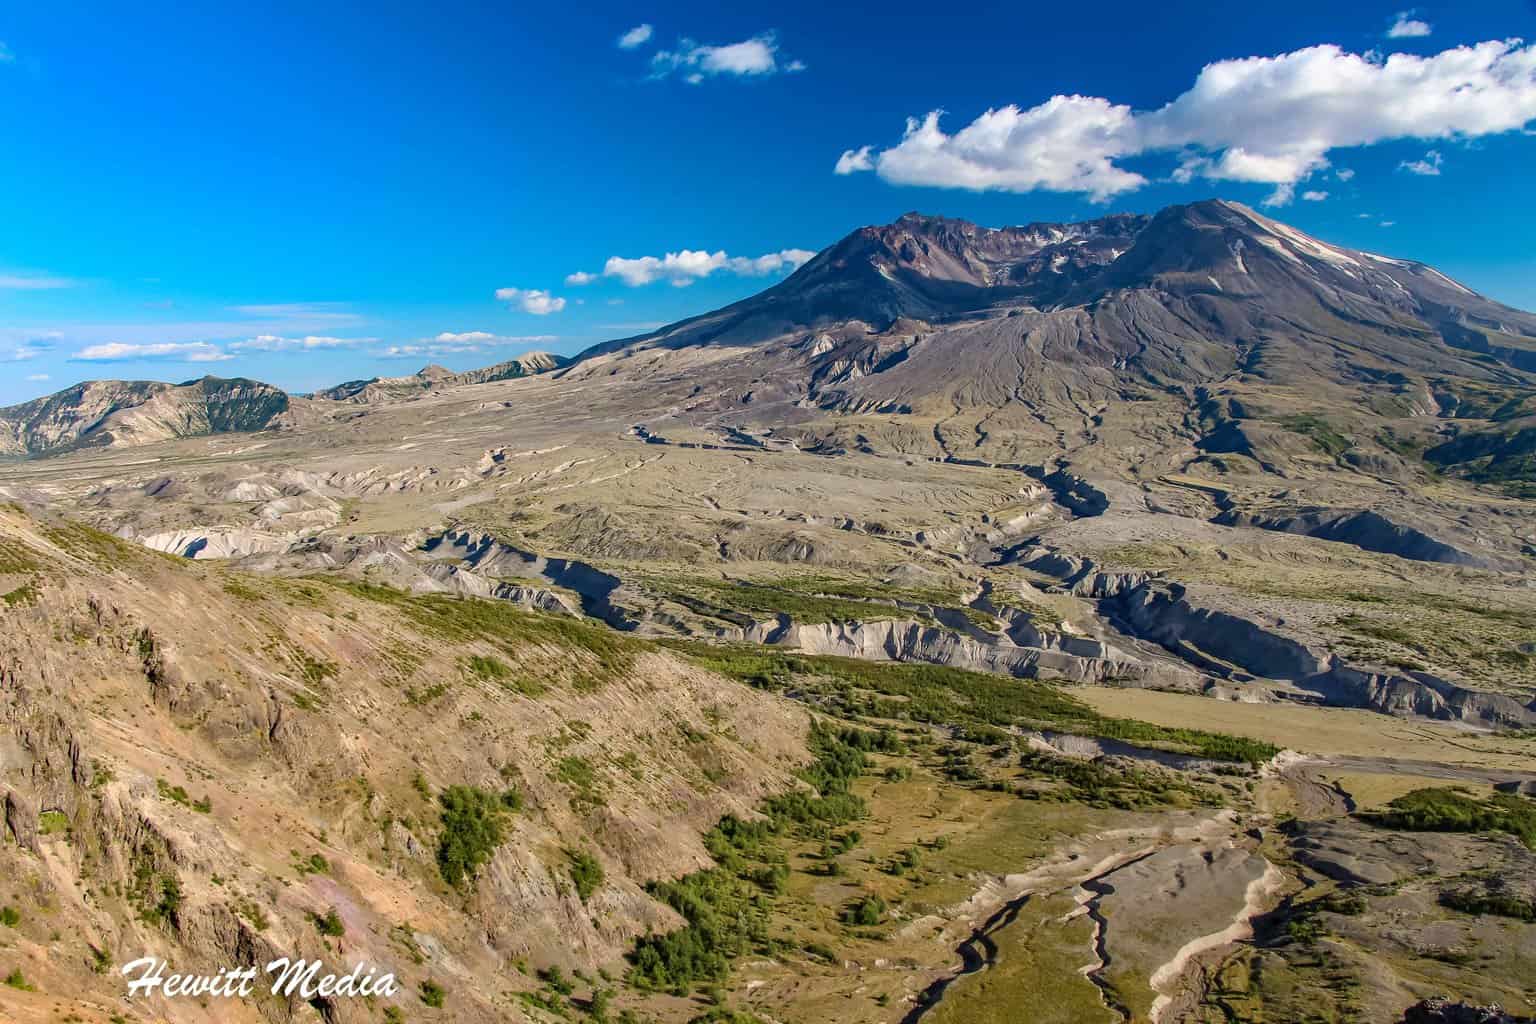 The Complete Mount Saint Helens National Volcanic Monument Visitor Guide